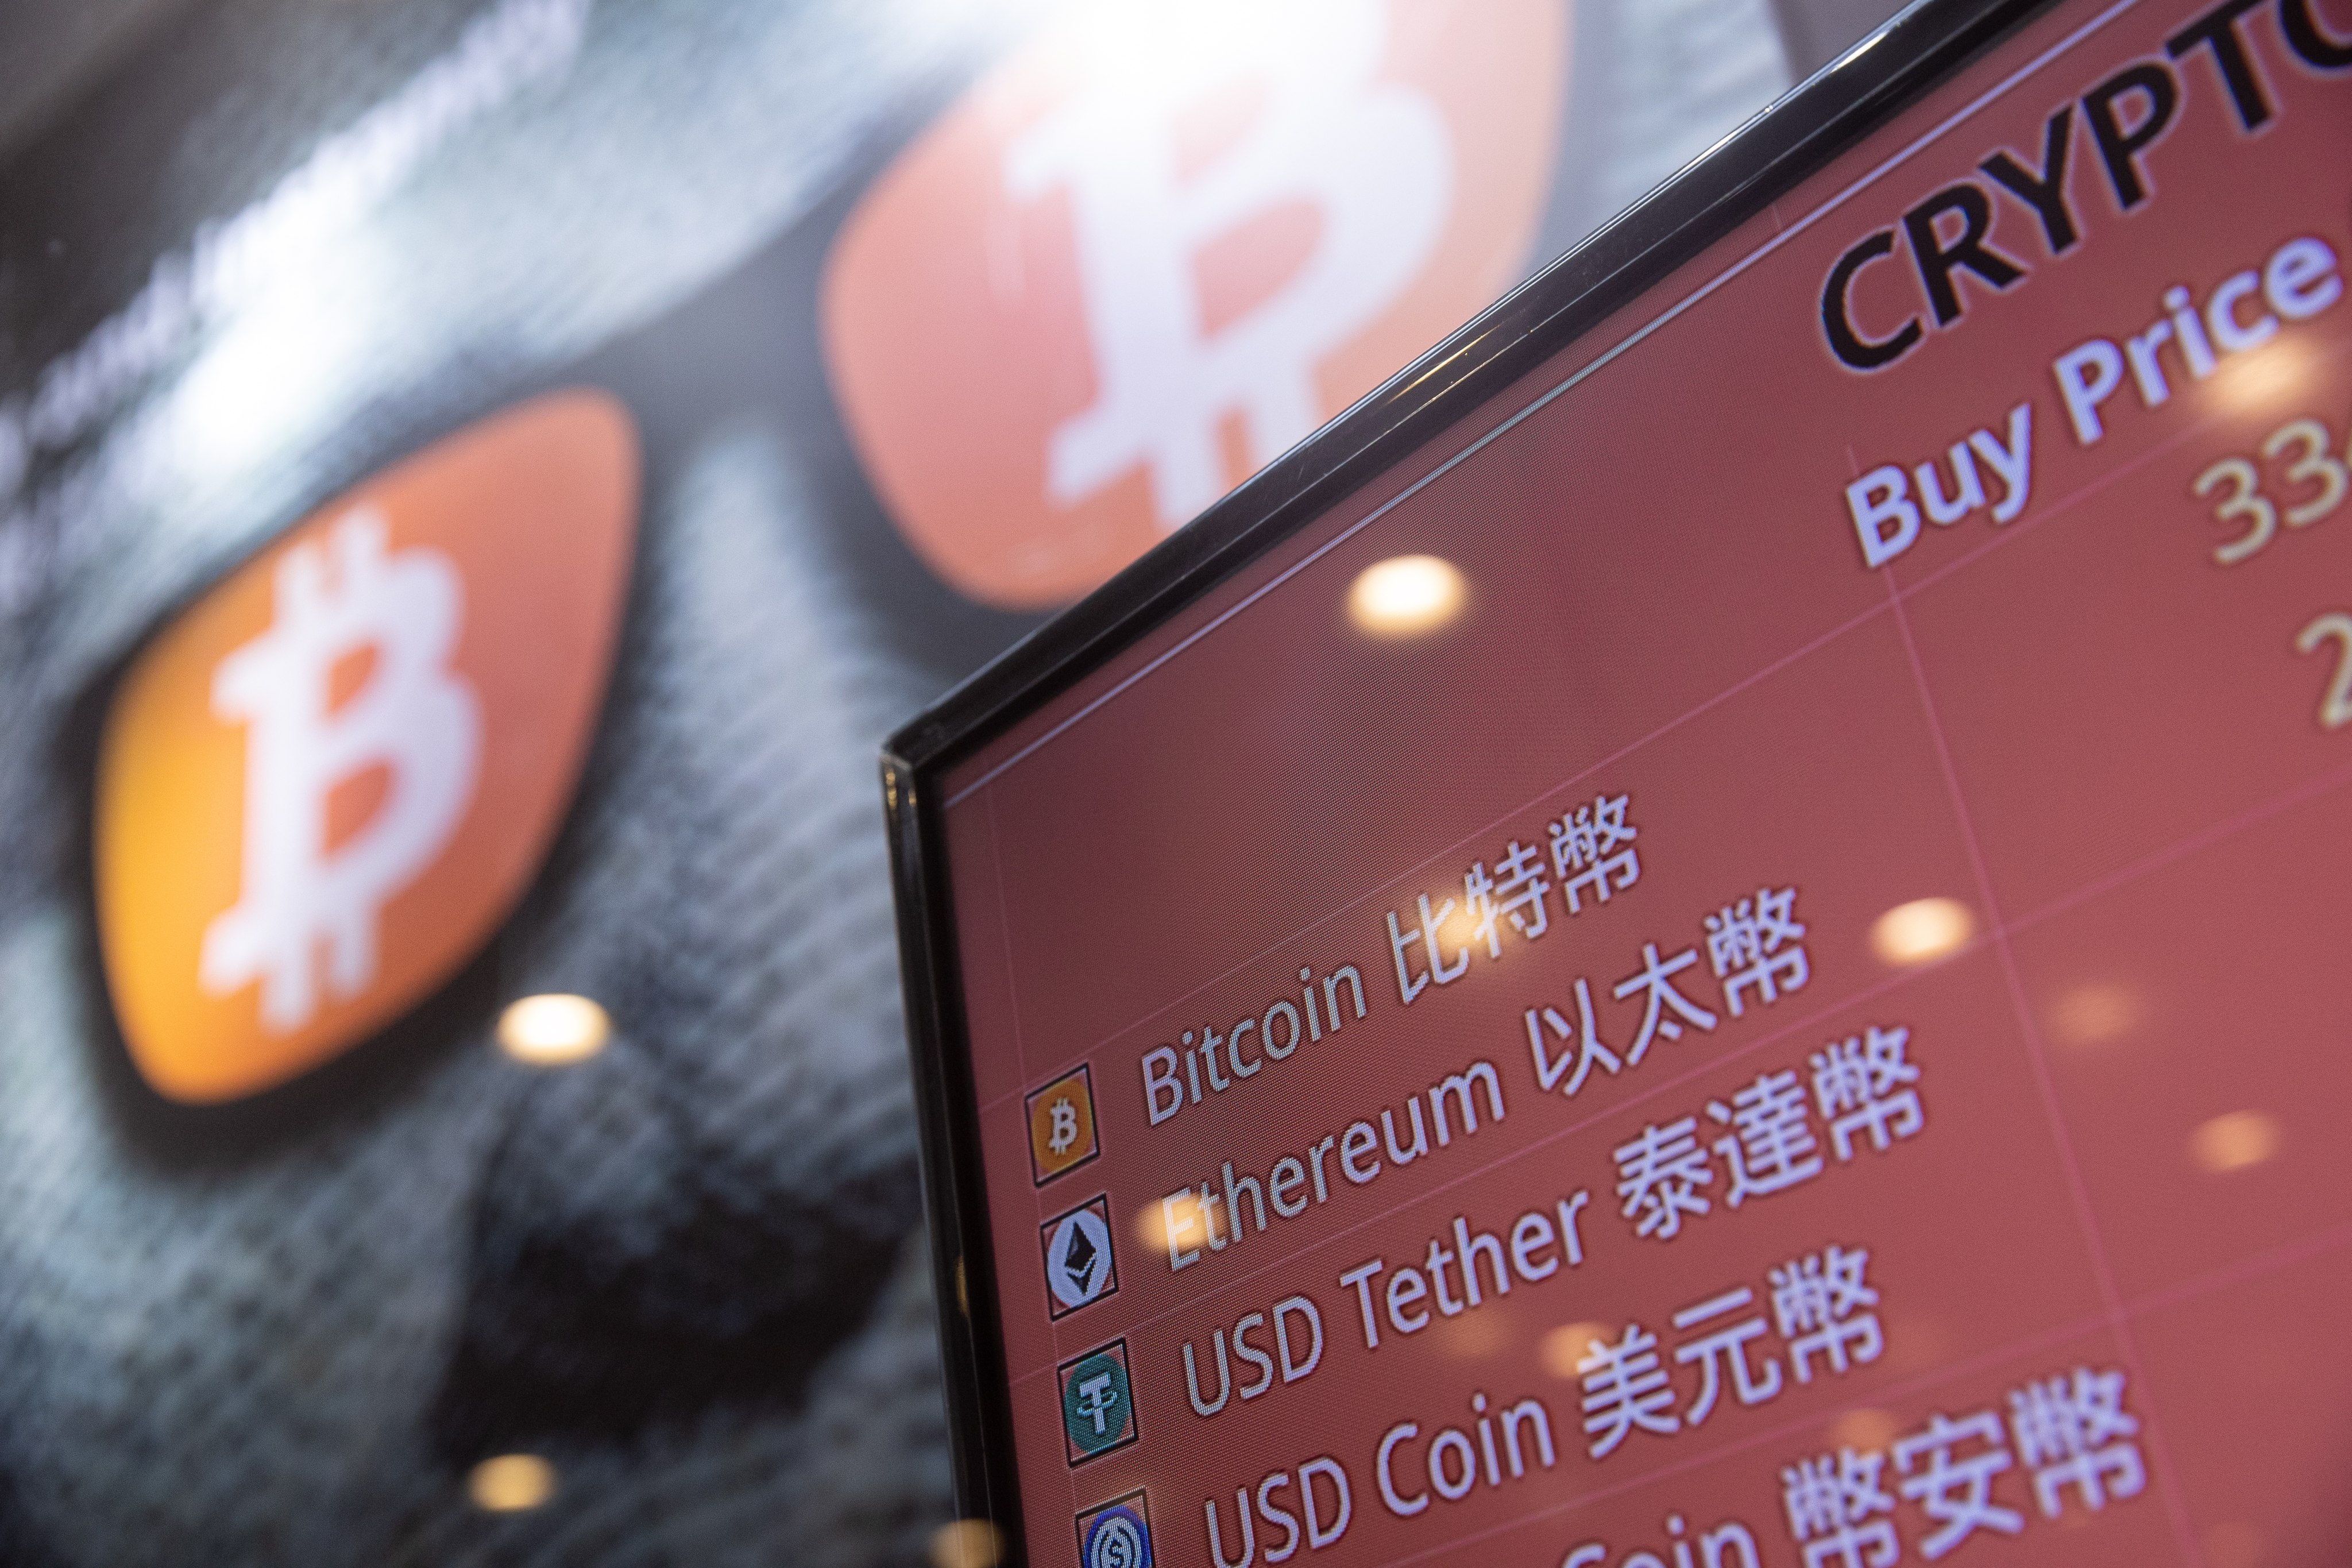 A monitor shows trading prices for bitcoin and other cryptocurrencies in Hong Kong on September 25, 2021. China is back among the top 10 crypto-using countries in a new report from Chainalysis, but Hong Kong is not even among the top 40. Photo: EPA-EFE